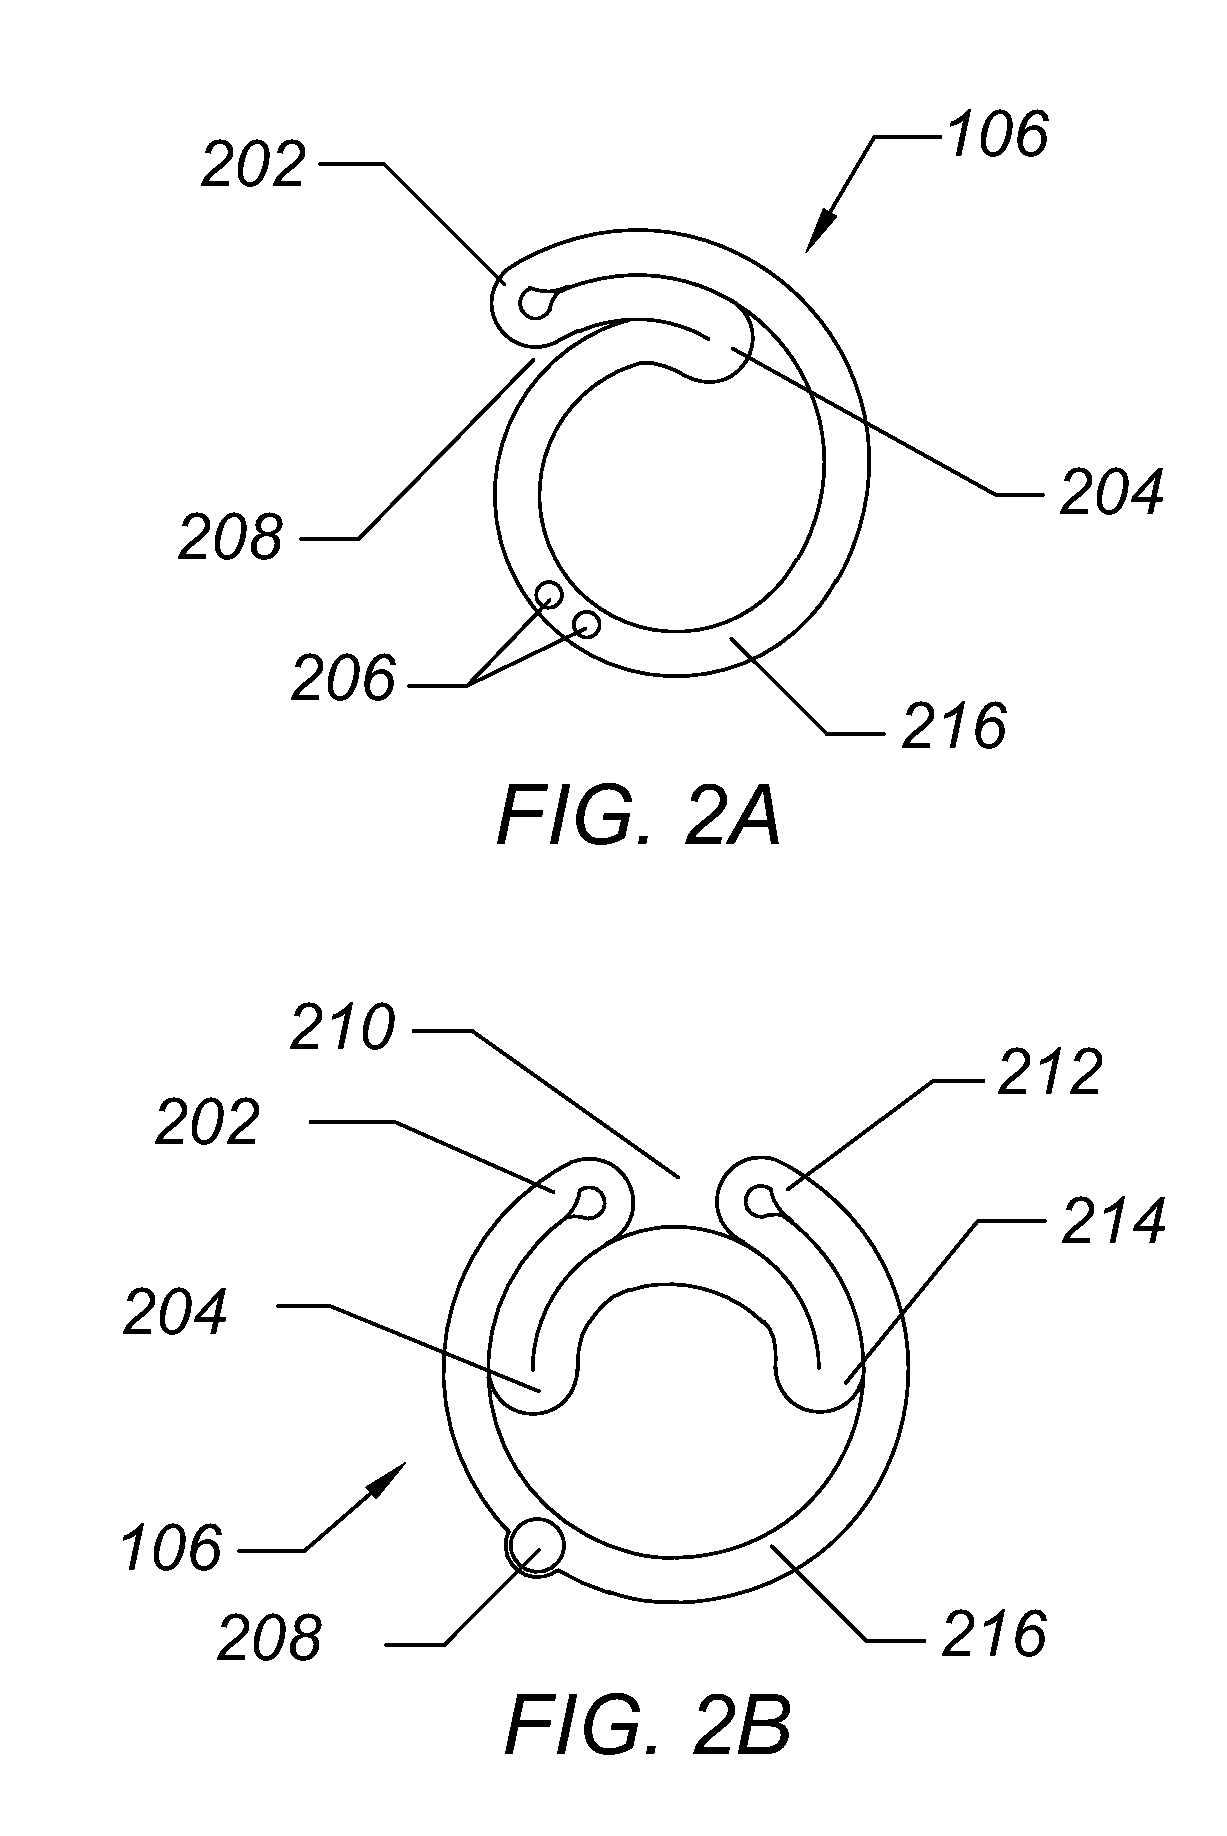 Expandable spinal sheath and method of use